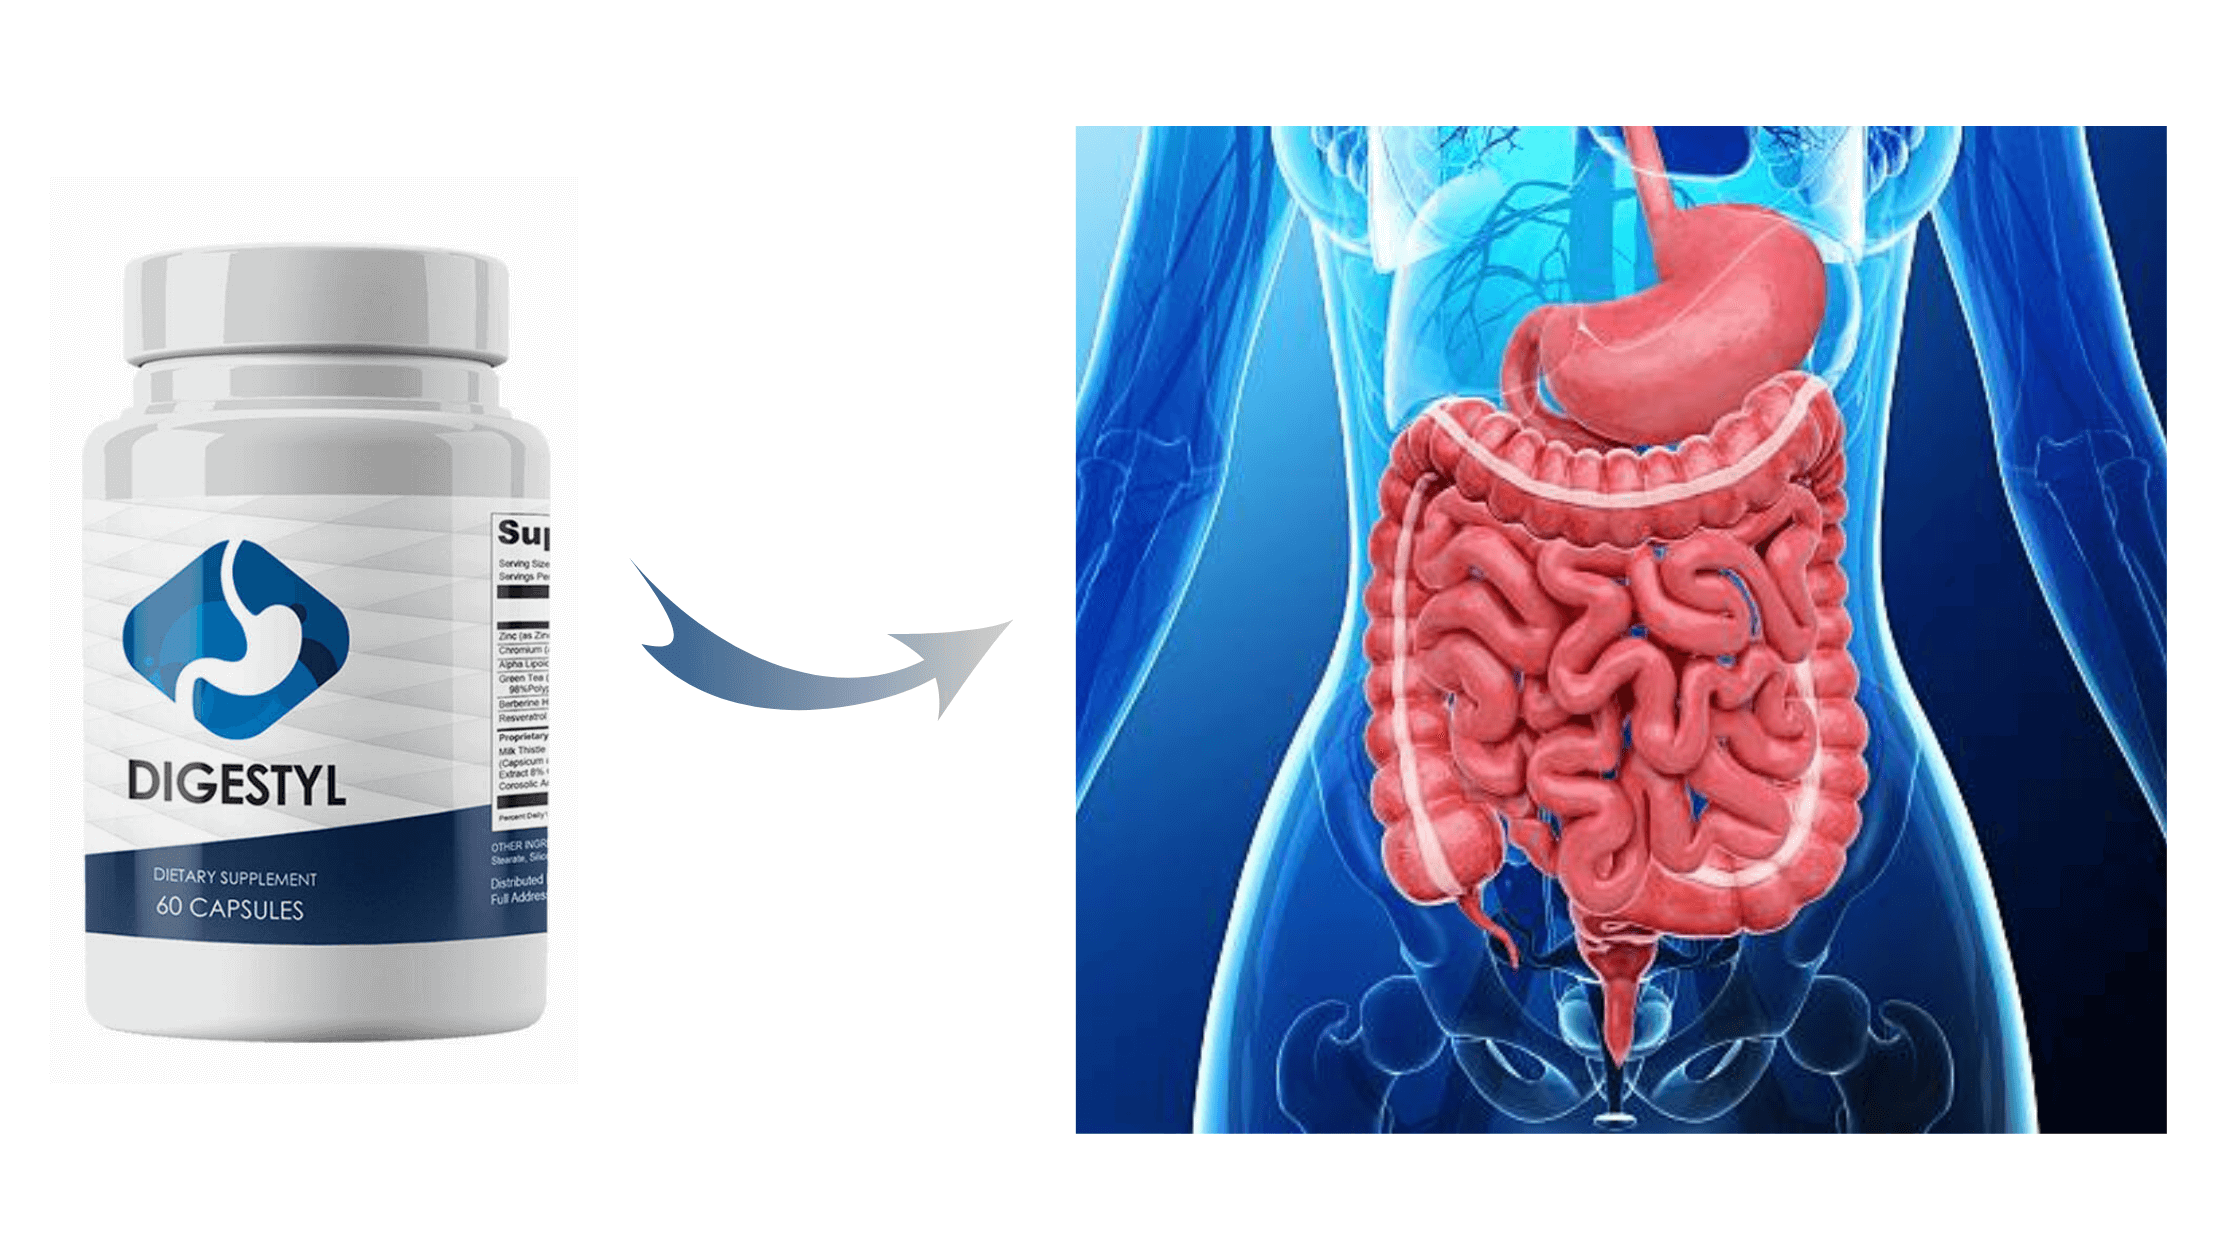 Digestyl Reviews - Is This Supplement Safe For Your Gut Health?